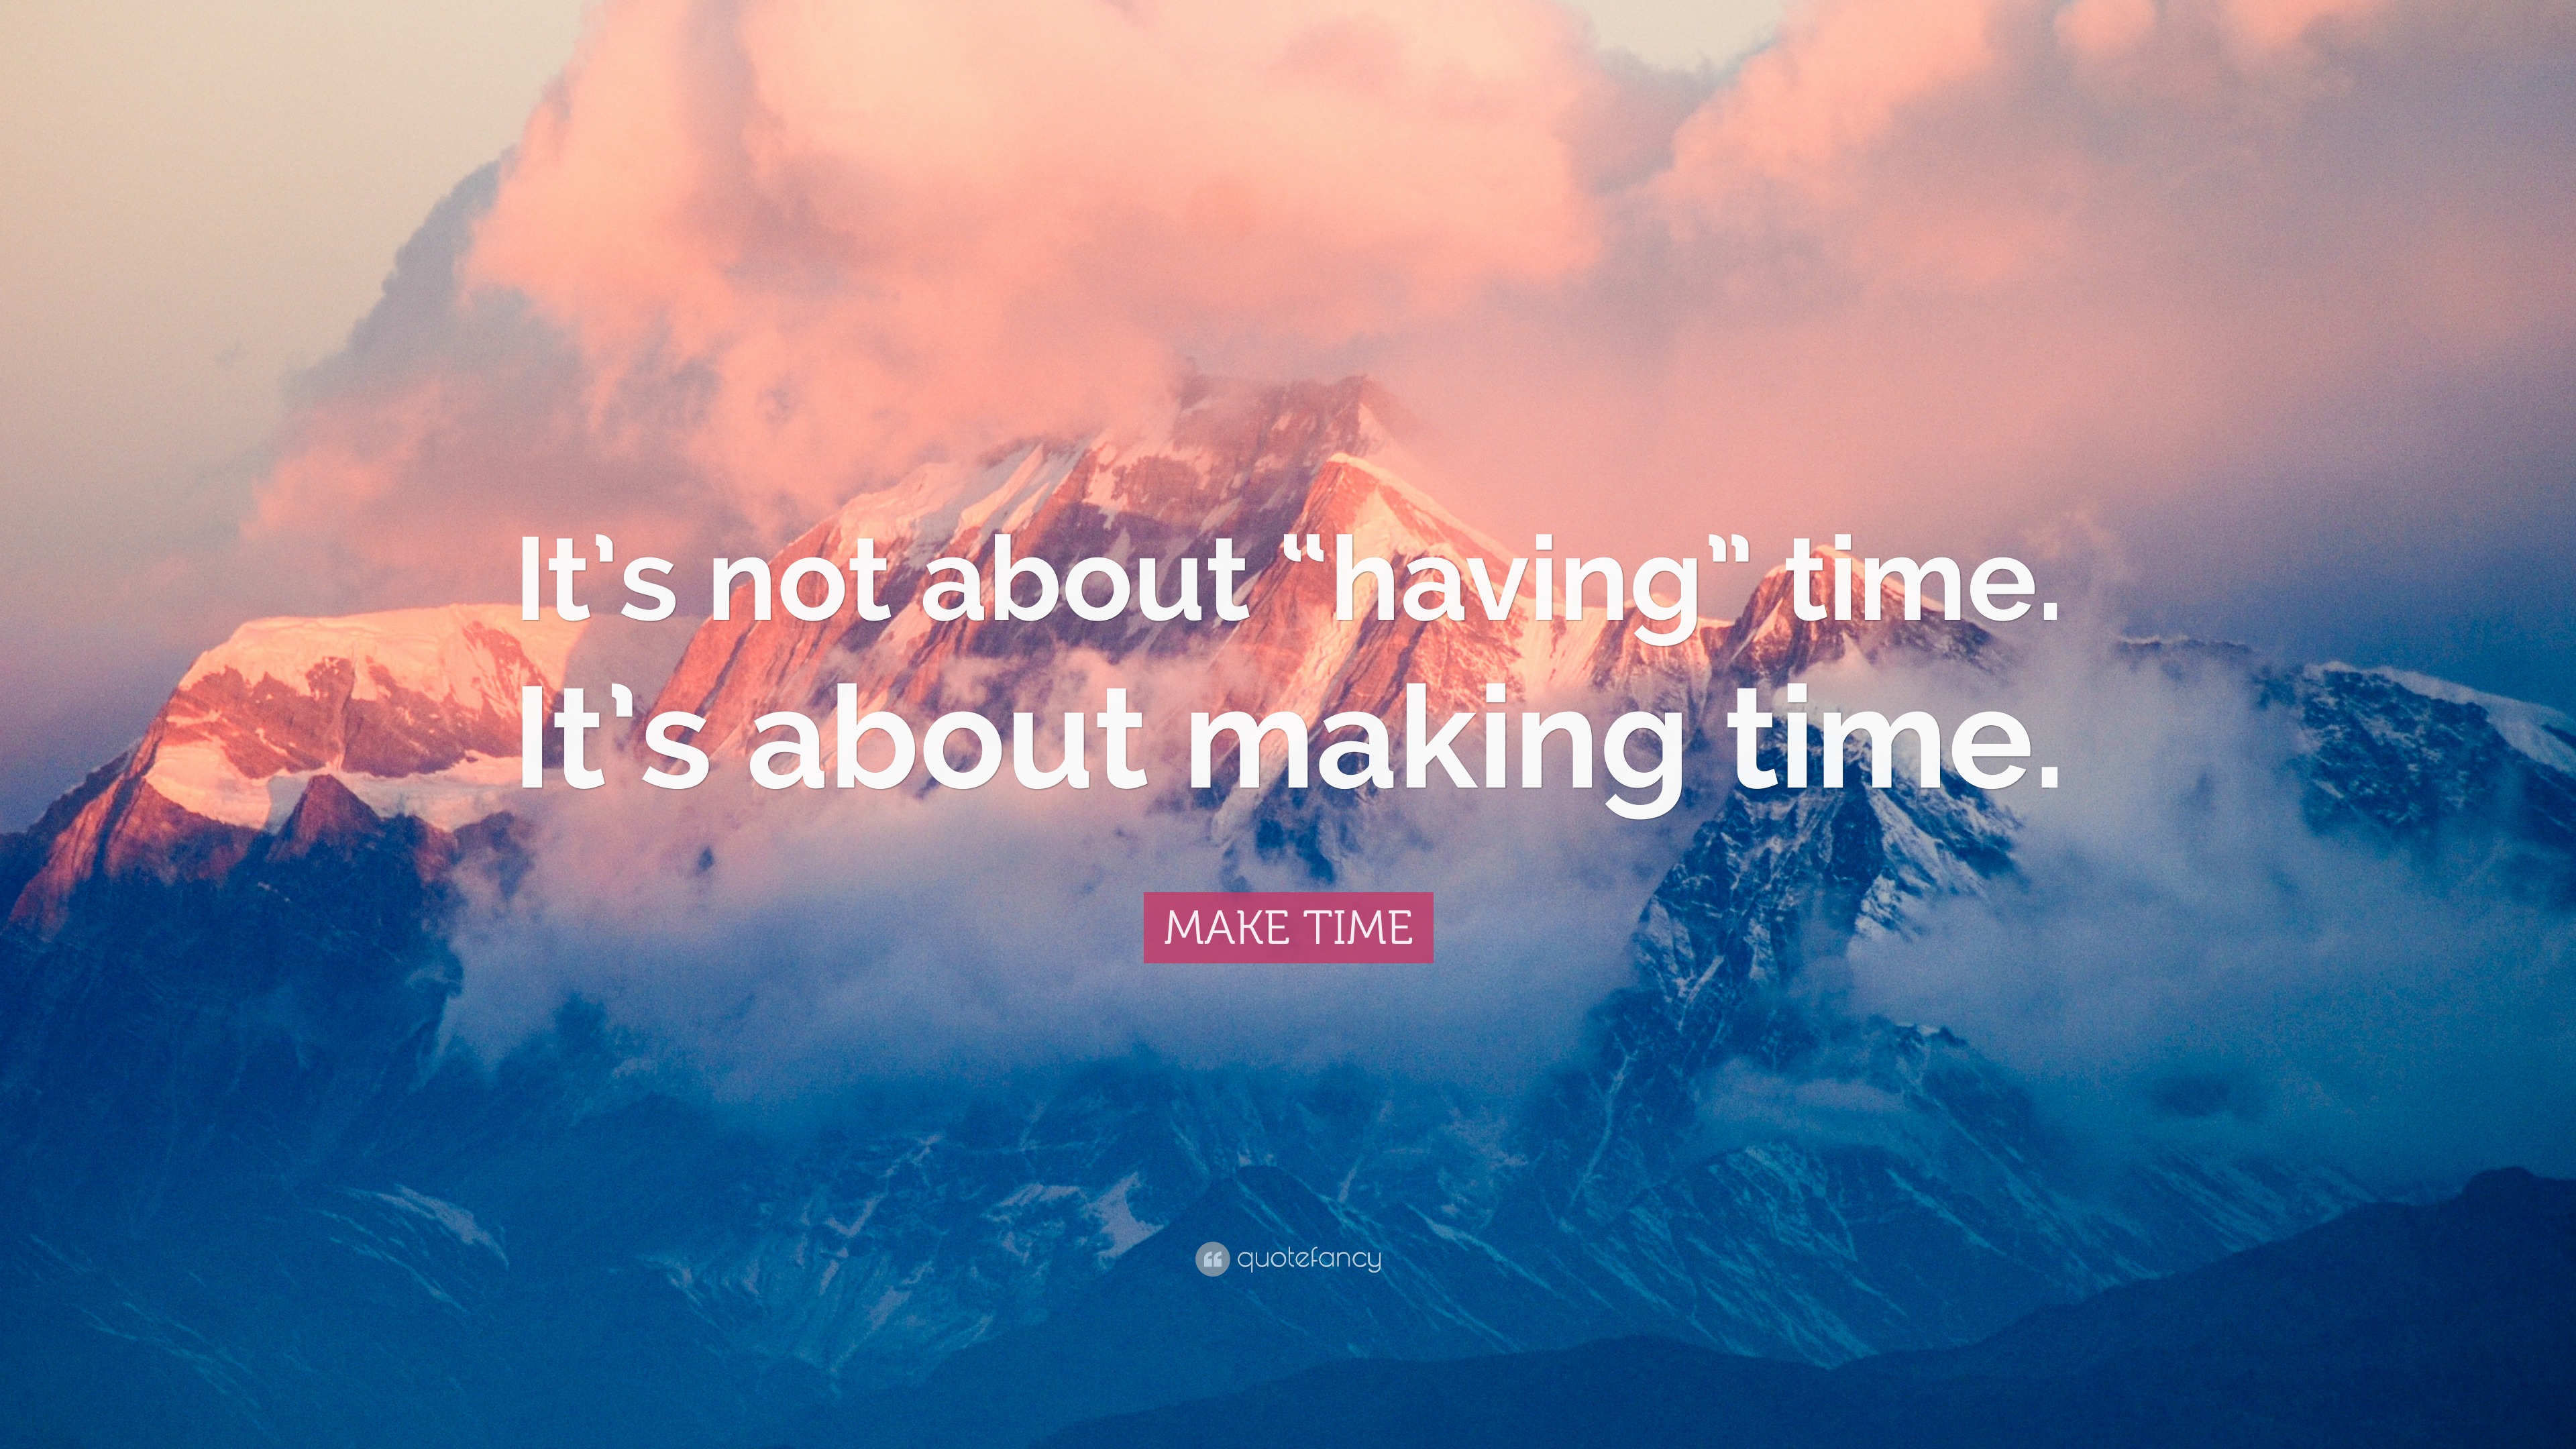 MAKE TIME Quote: “It’s not about “having” time. It’s about making time.”